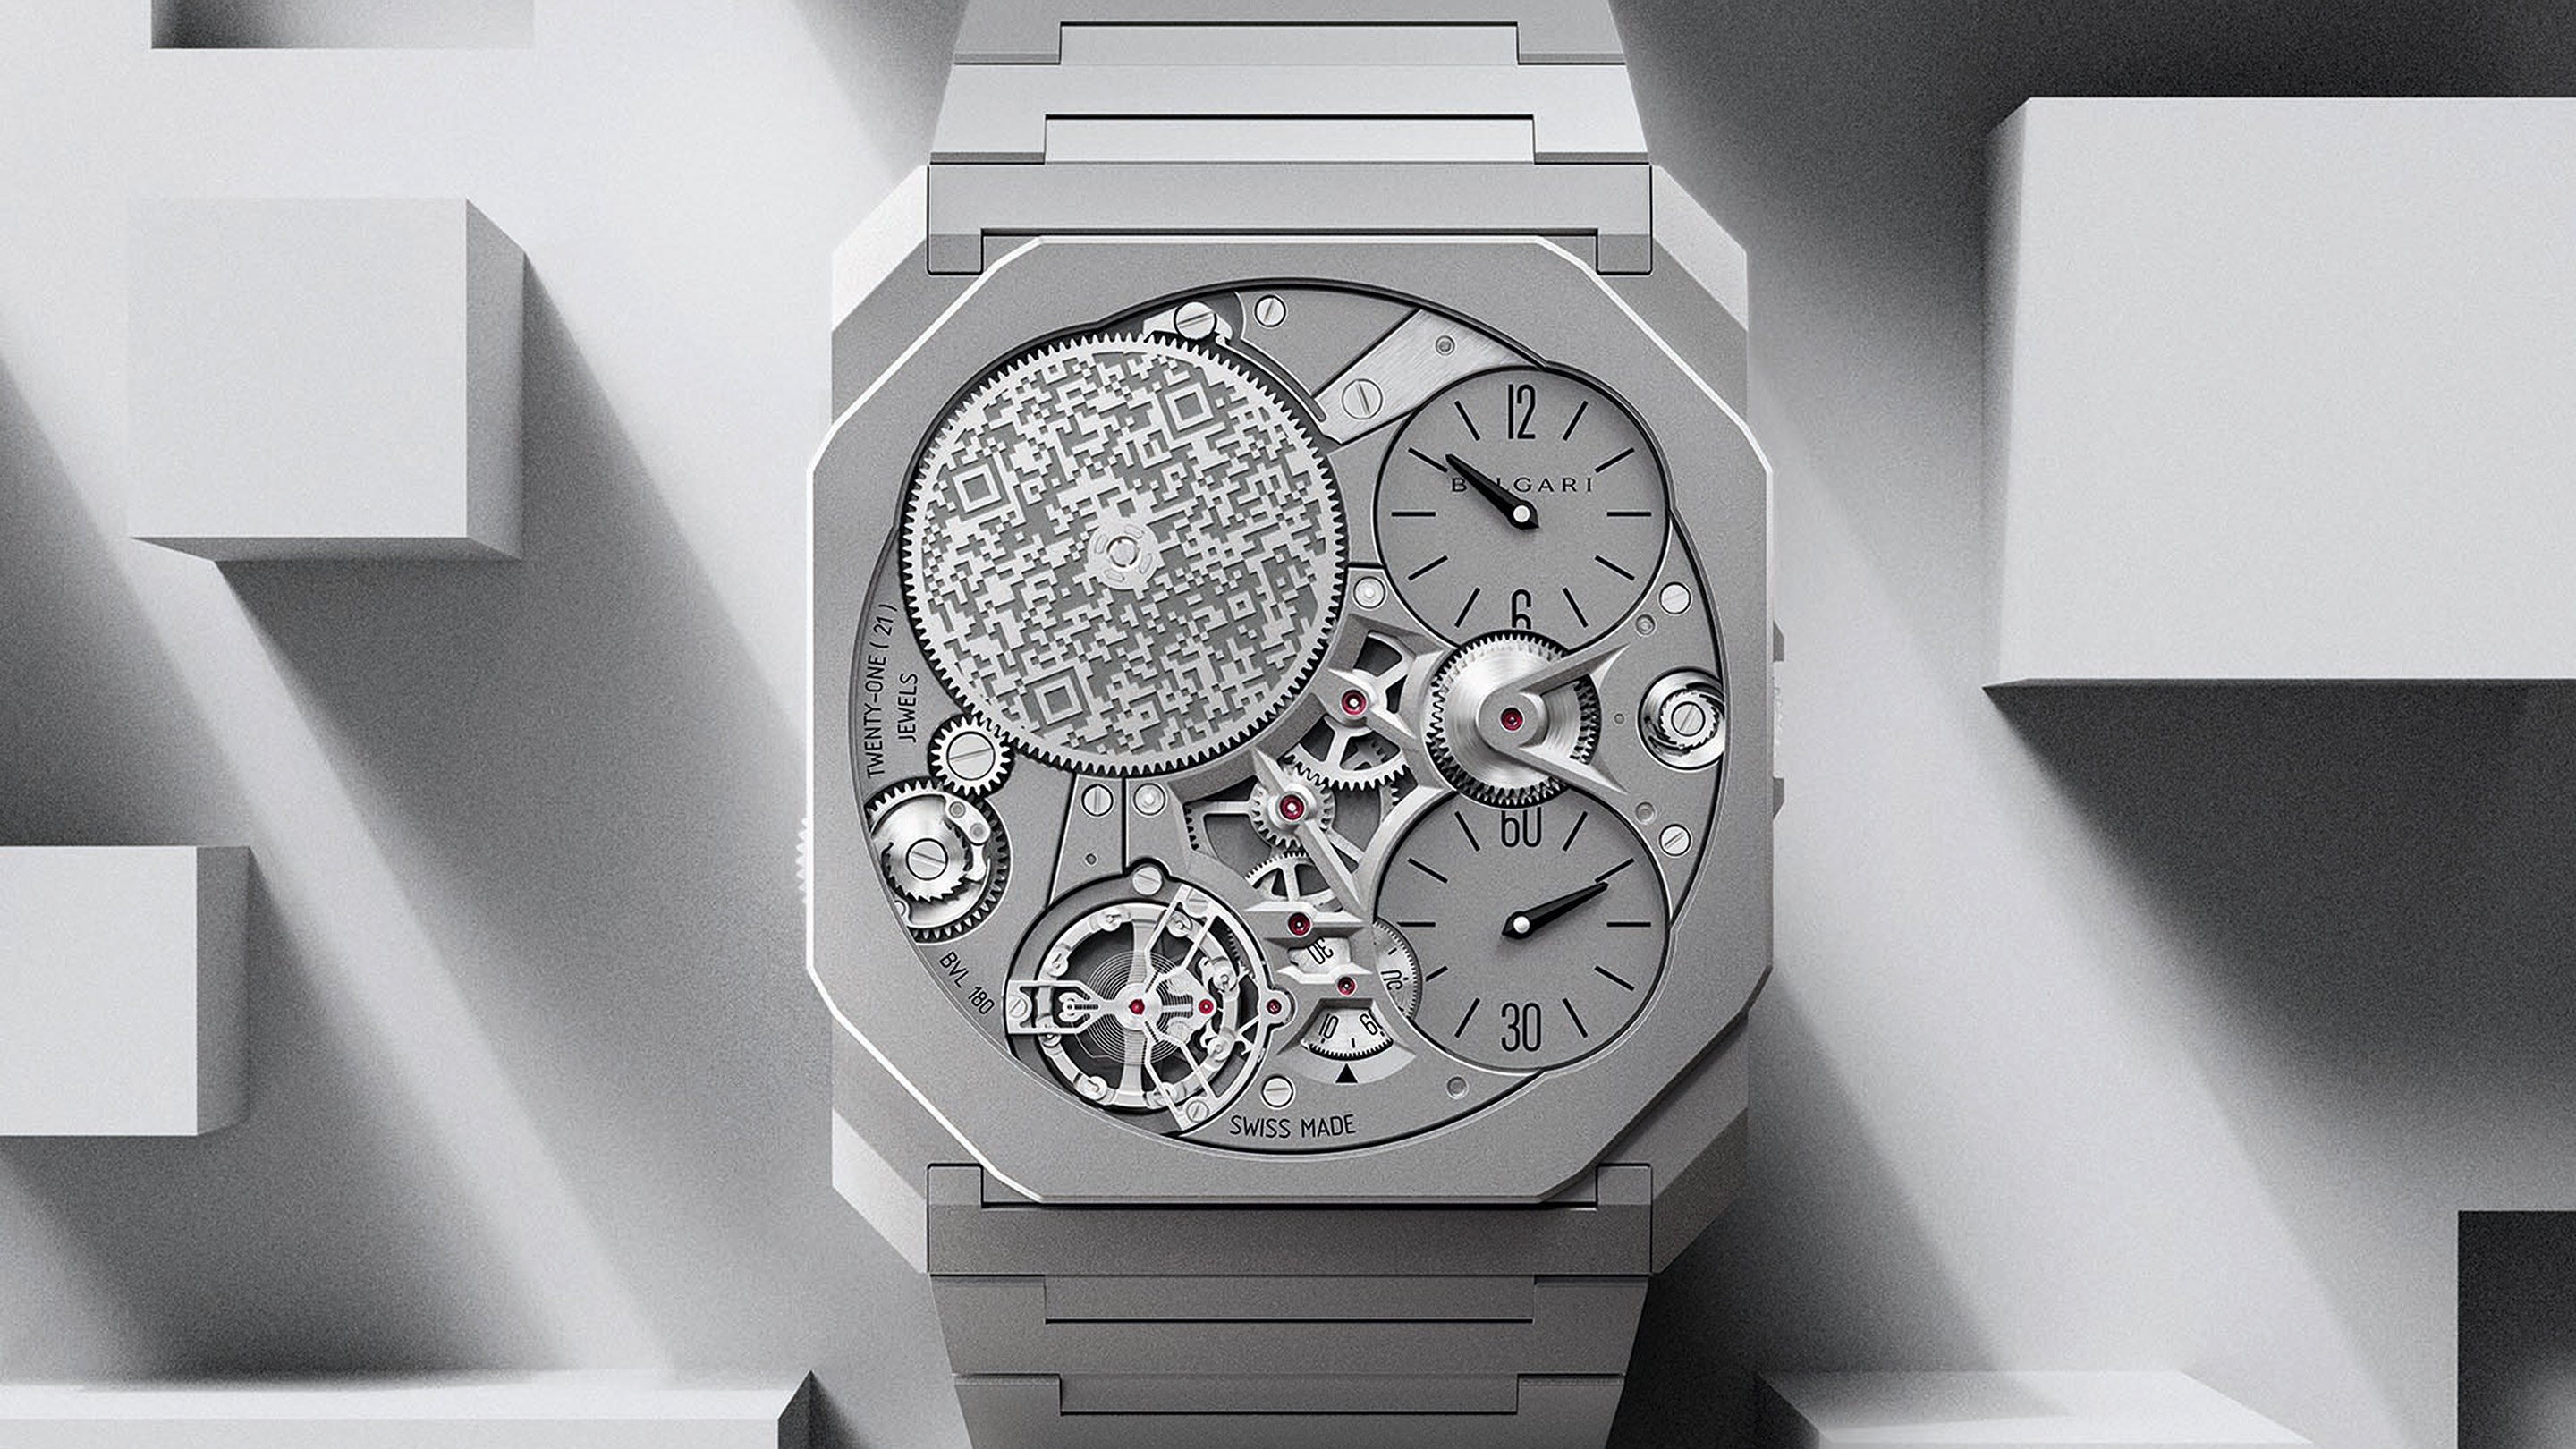 Bulgari launches the Octo Finissimo Ultra, the world's thinnest